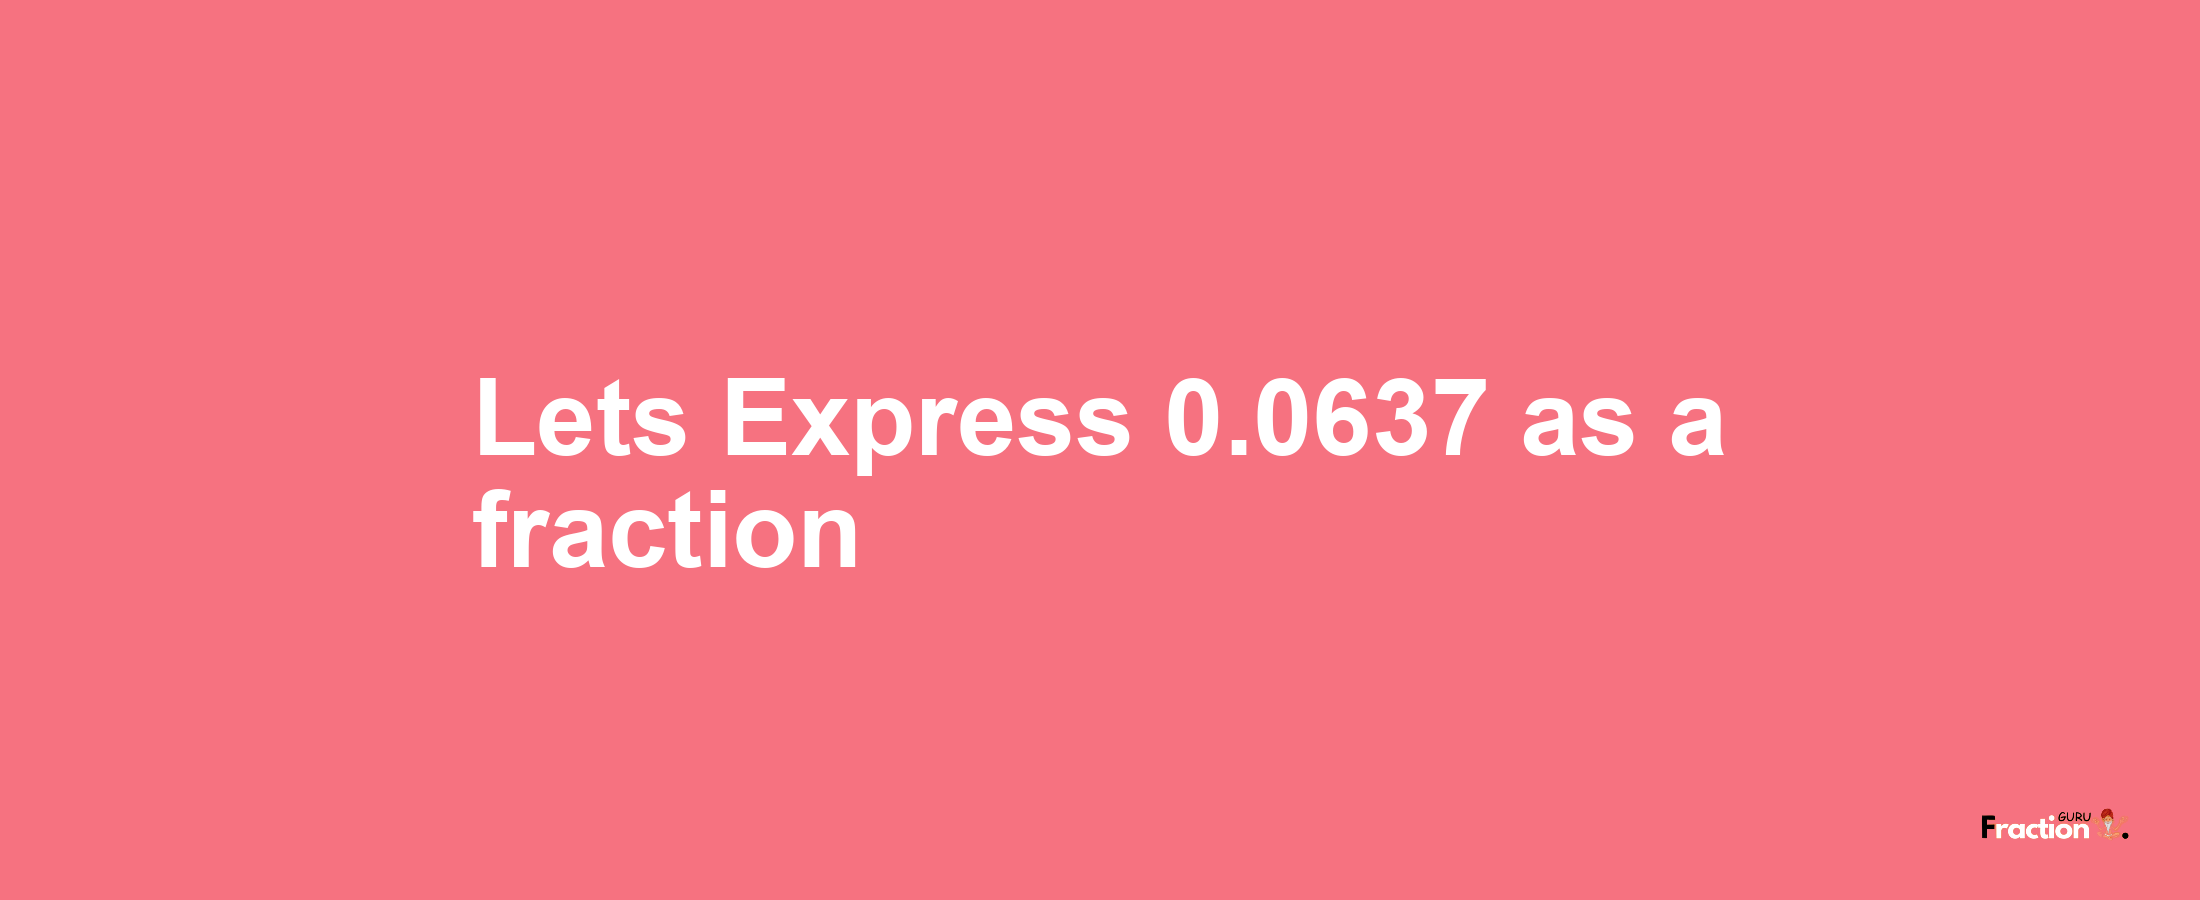 Lets Express 0.0637 as afraction